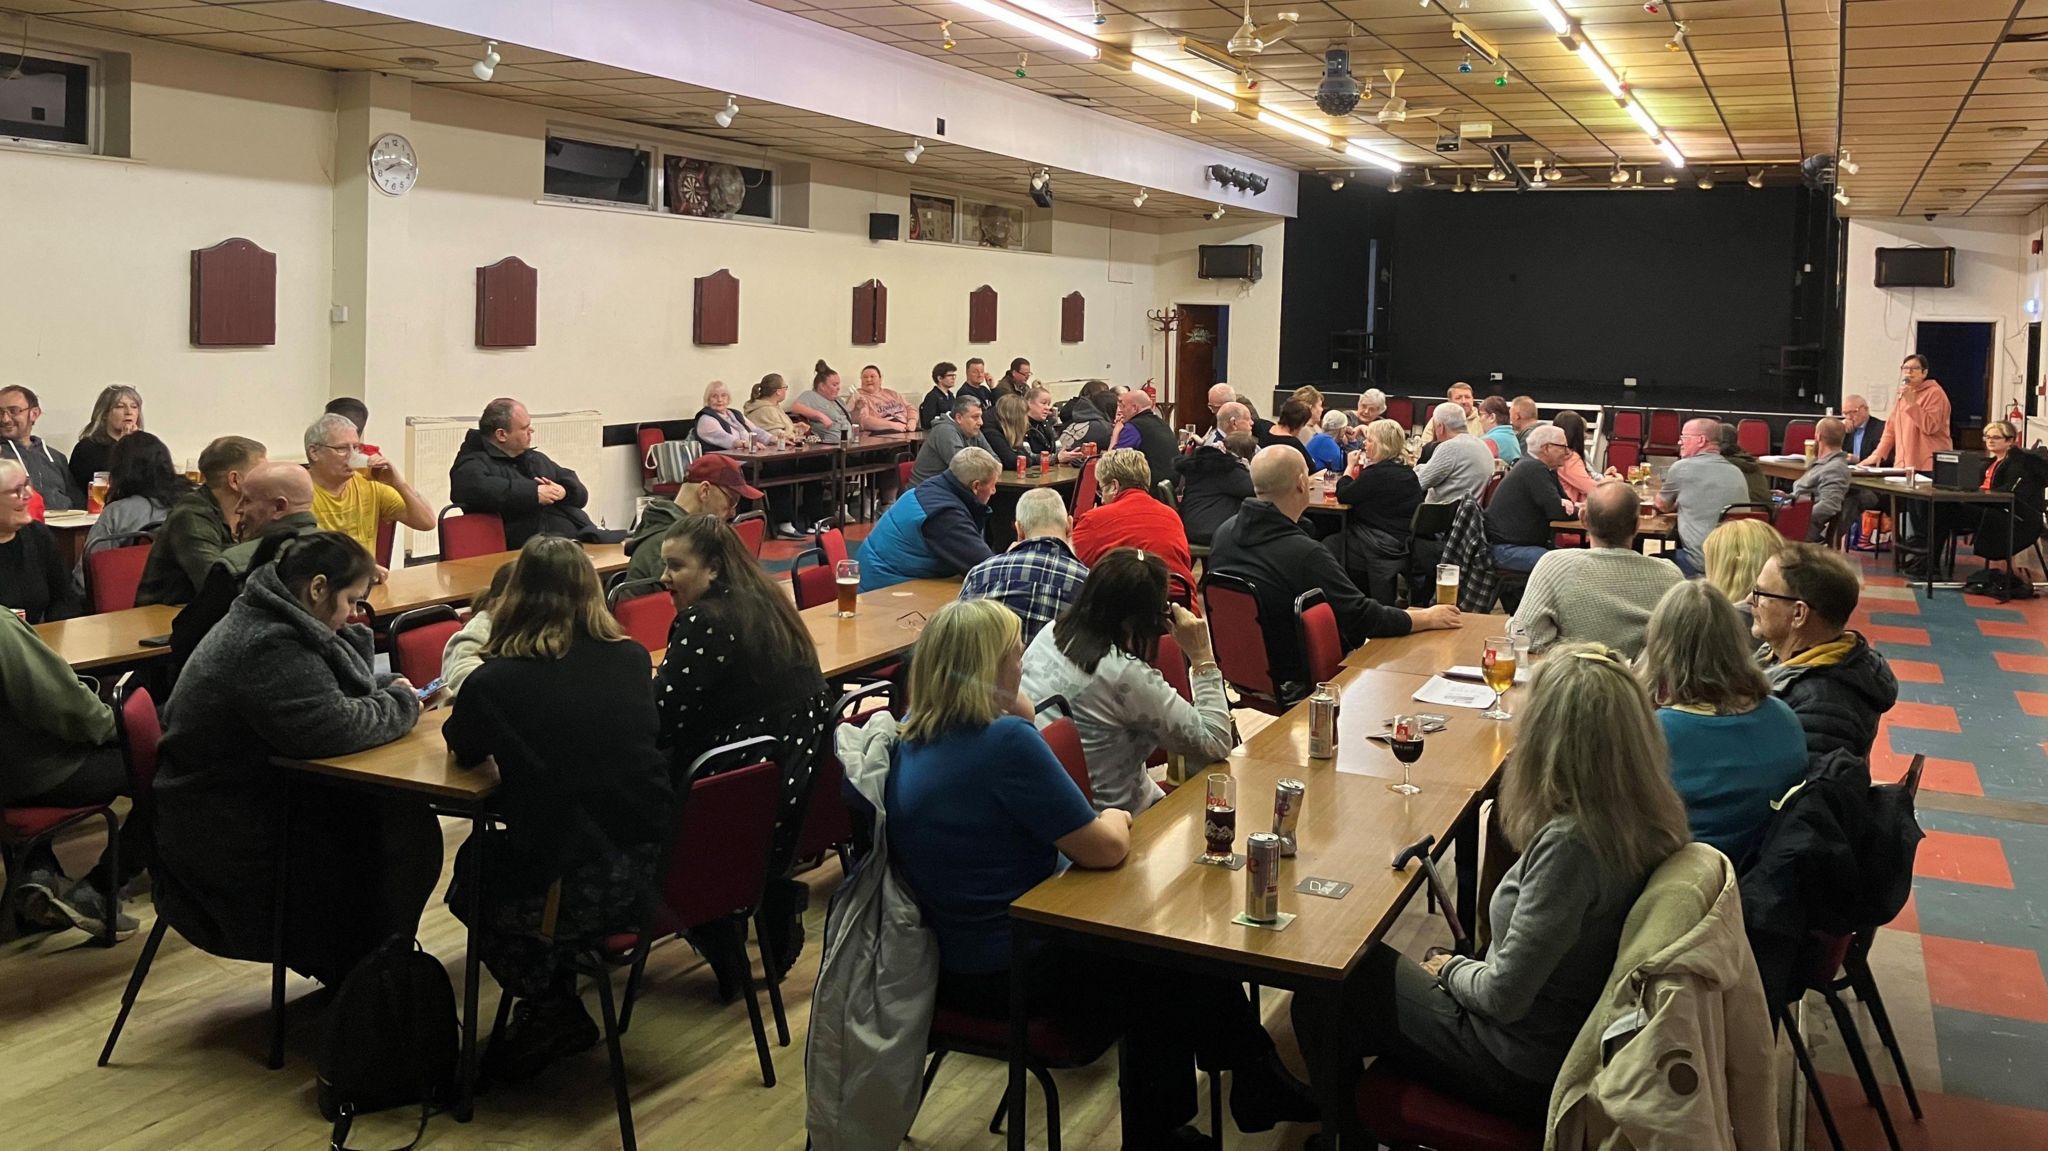 A picture of a public meeting, people sitting at long tables in a function room